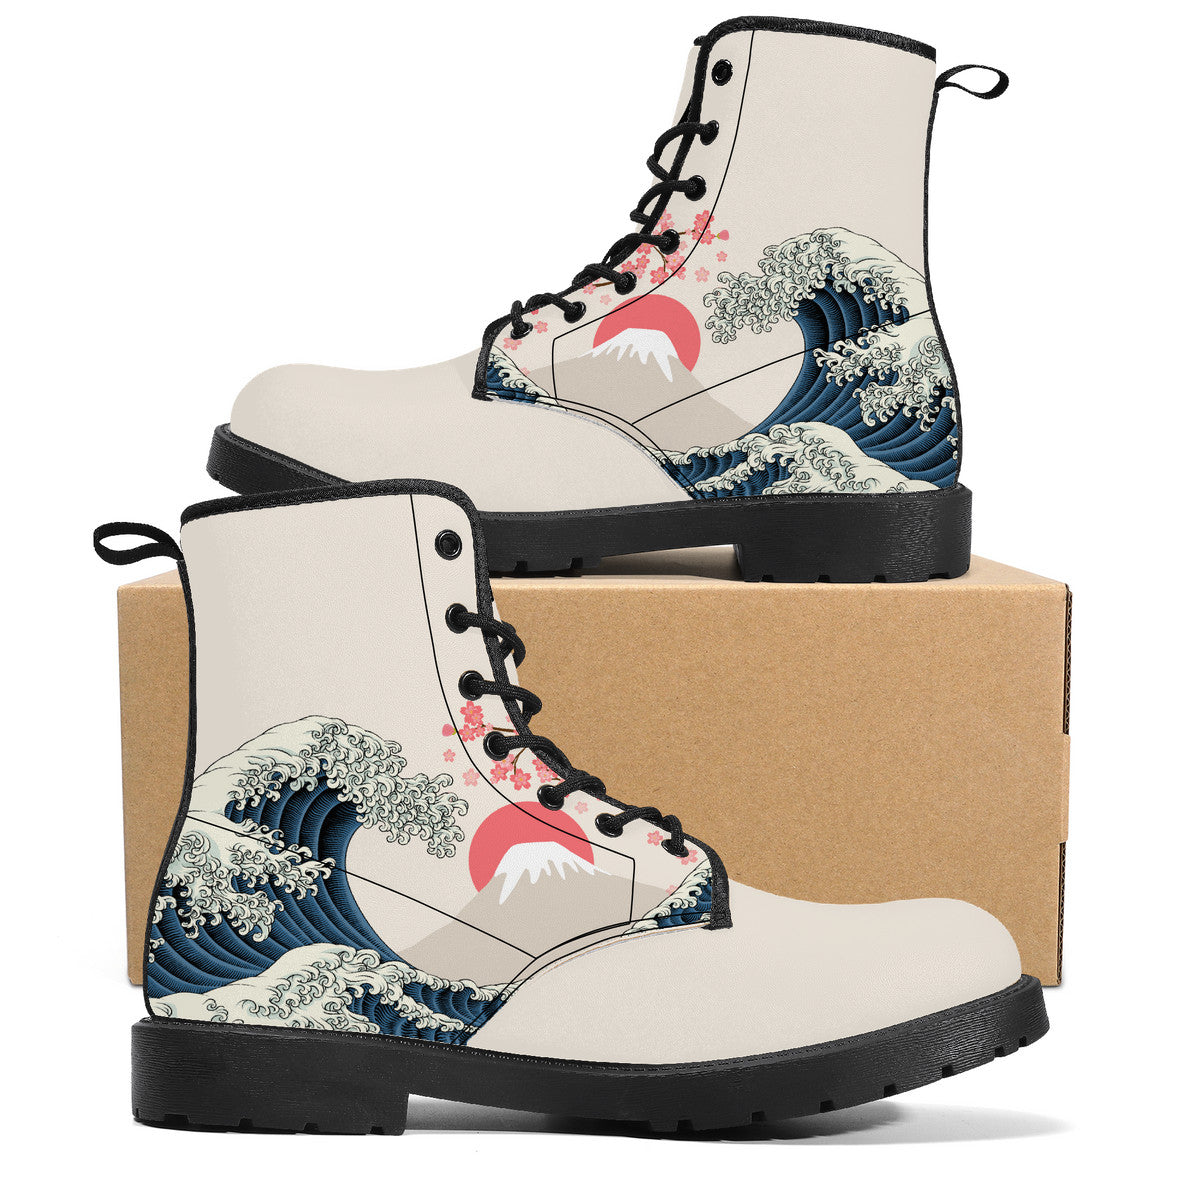 The Great Wave and Sakura Vegan Leather Boots